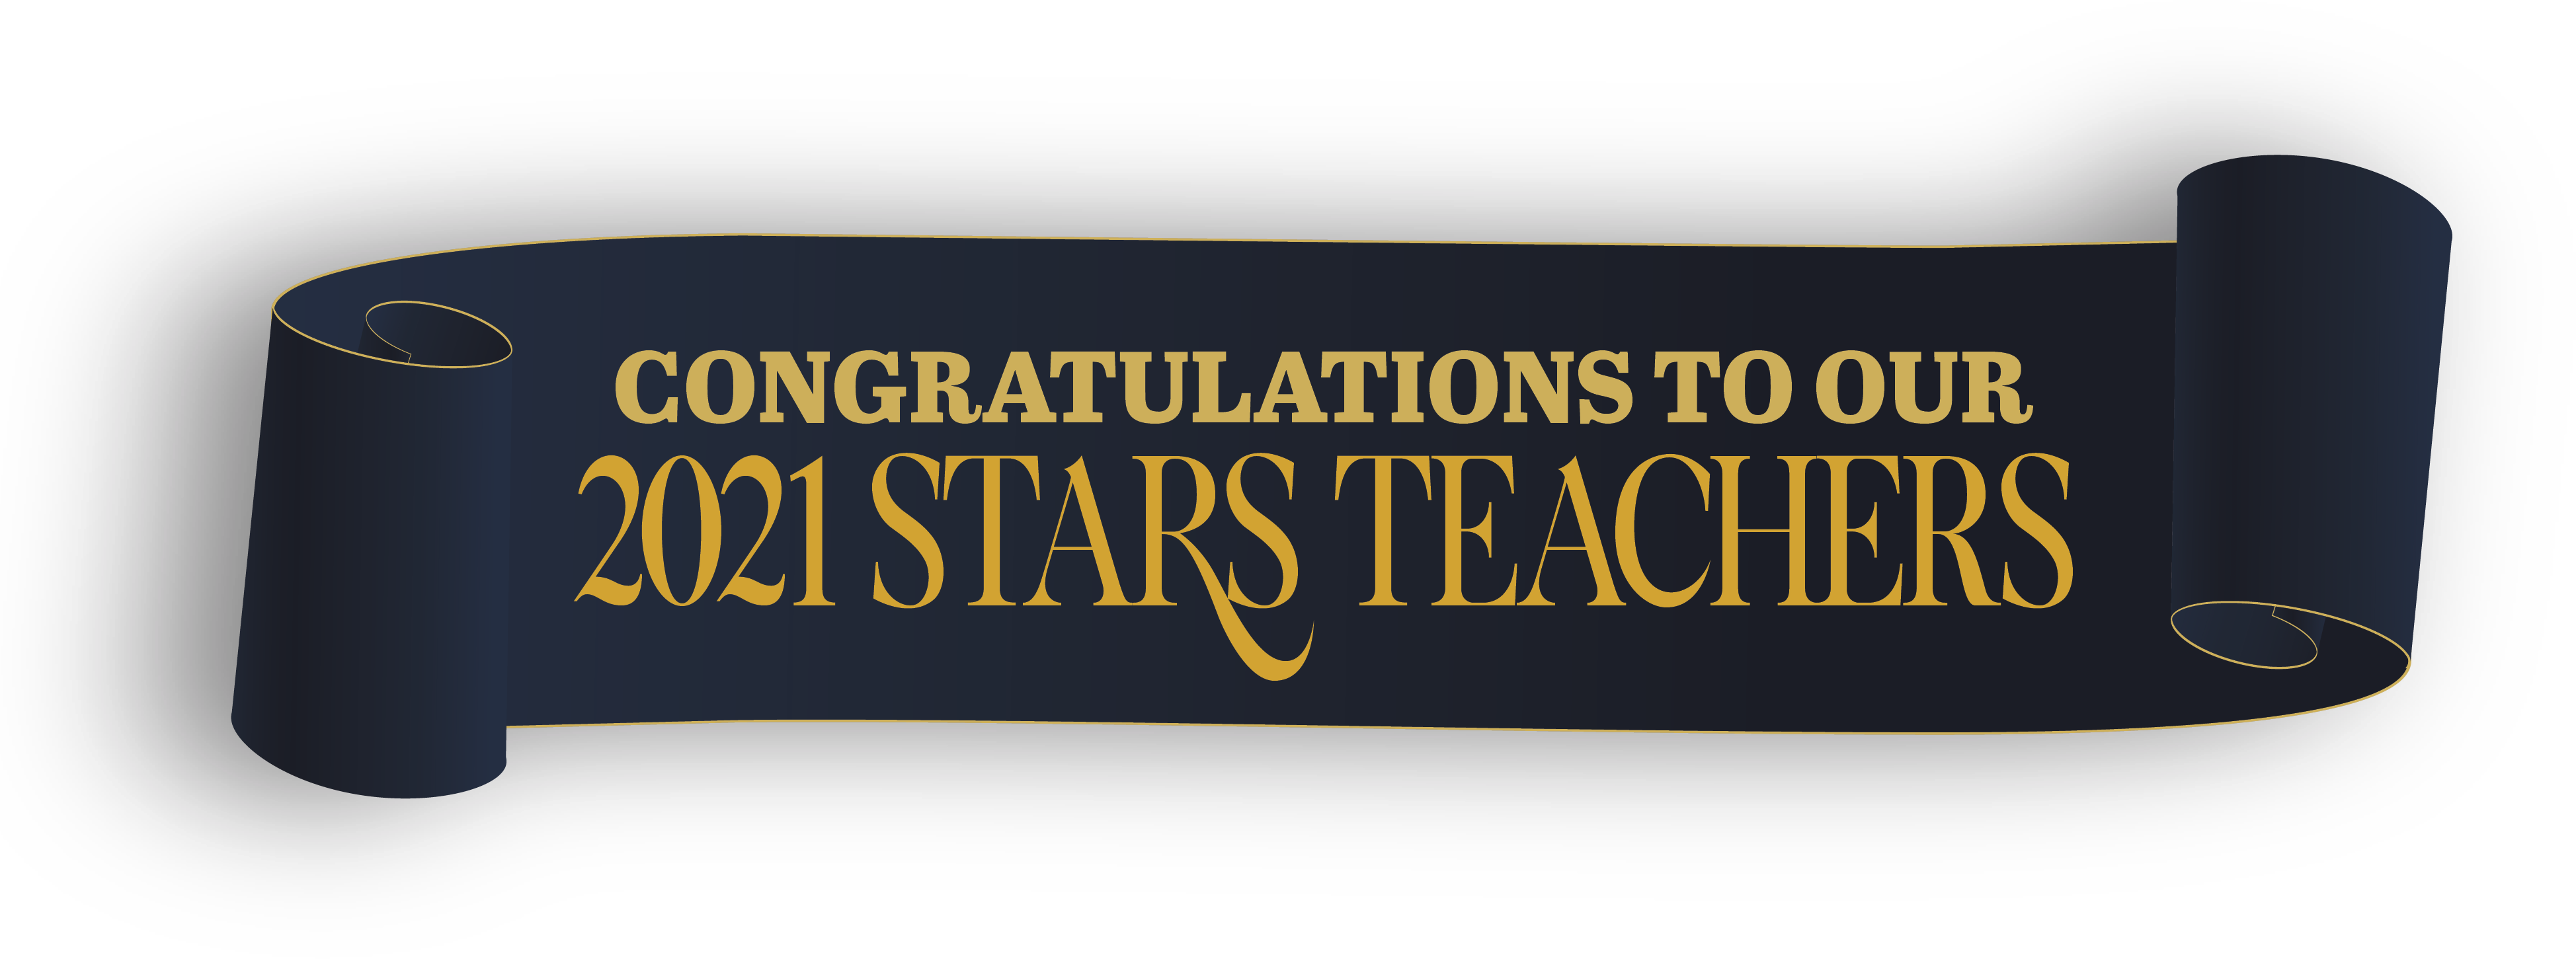 Congratulations to our 2021 Stars teachers